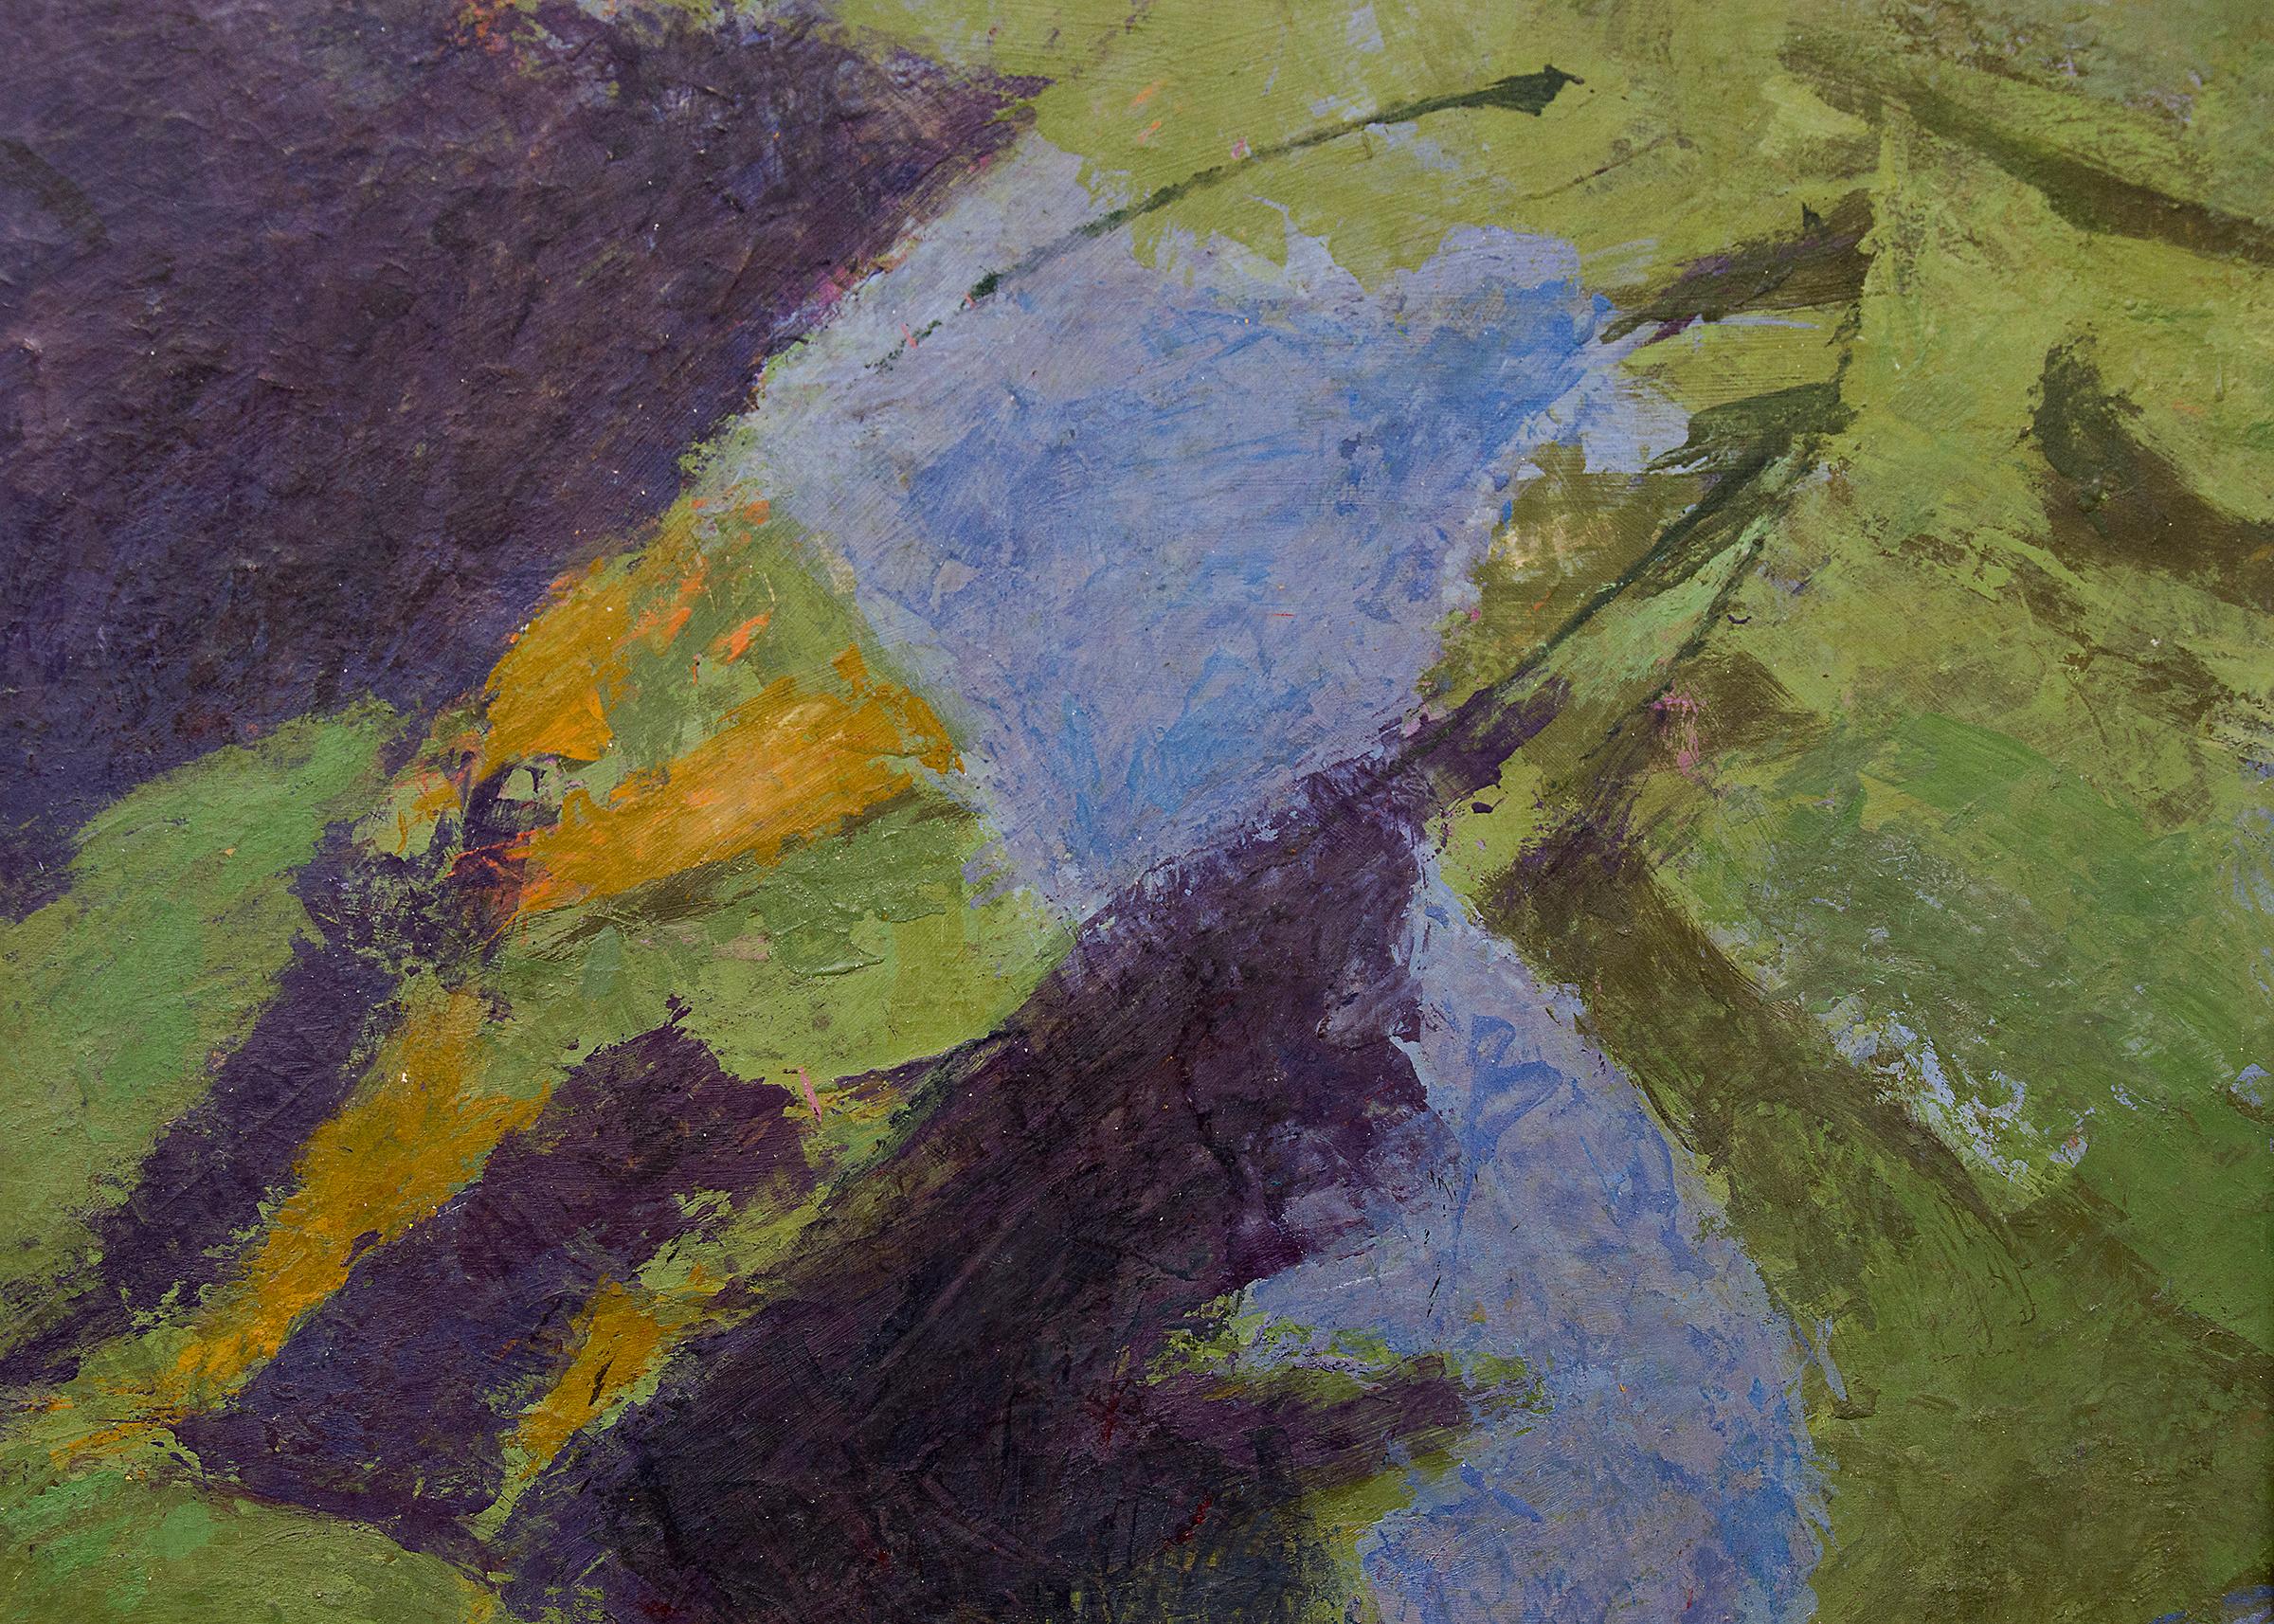 End of the Meadow, original vintage 1970s painting by Colorado/Woodstock, NY woman artist, Ethel Magafan (1916-1993), semi Abstract Colorado Mountain Landscape, tempera on masonite in colors of yellow, gold, green, purple, blue, red and orange.